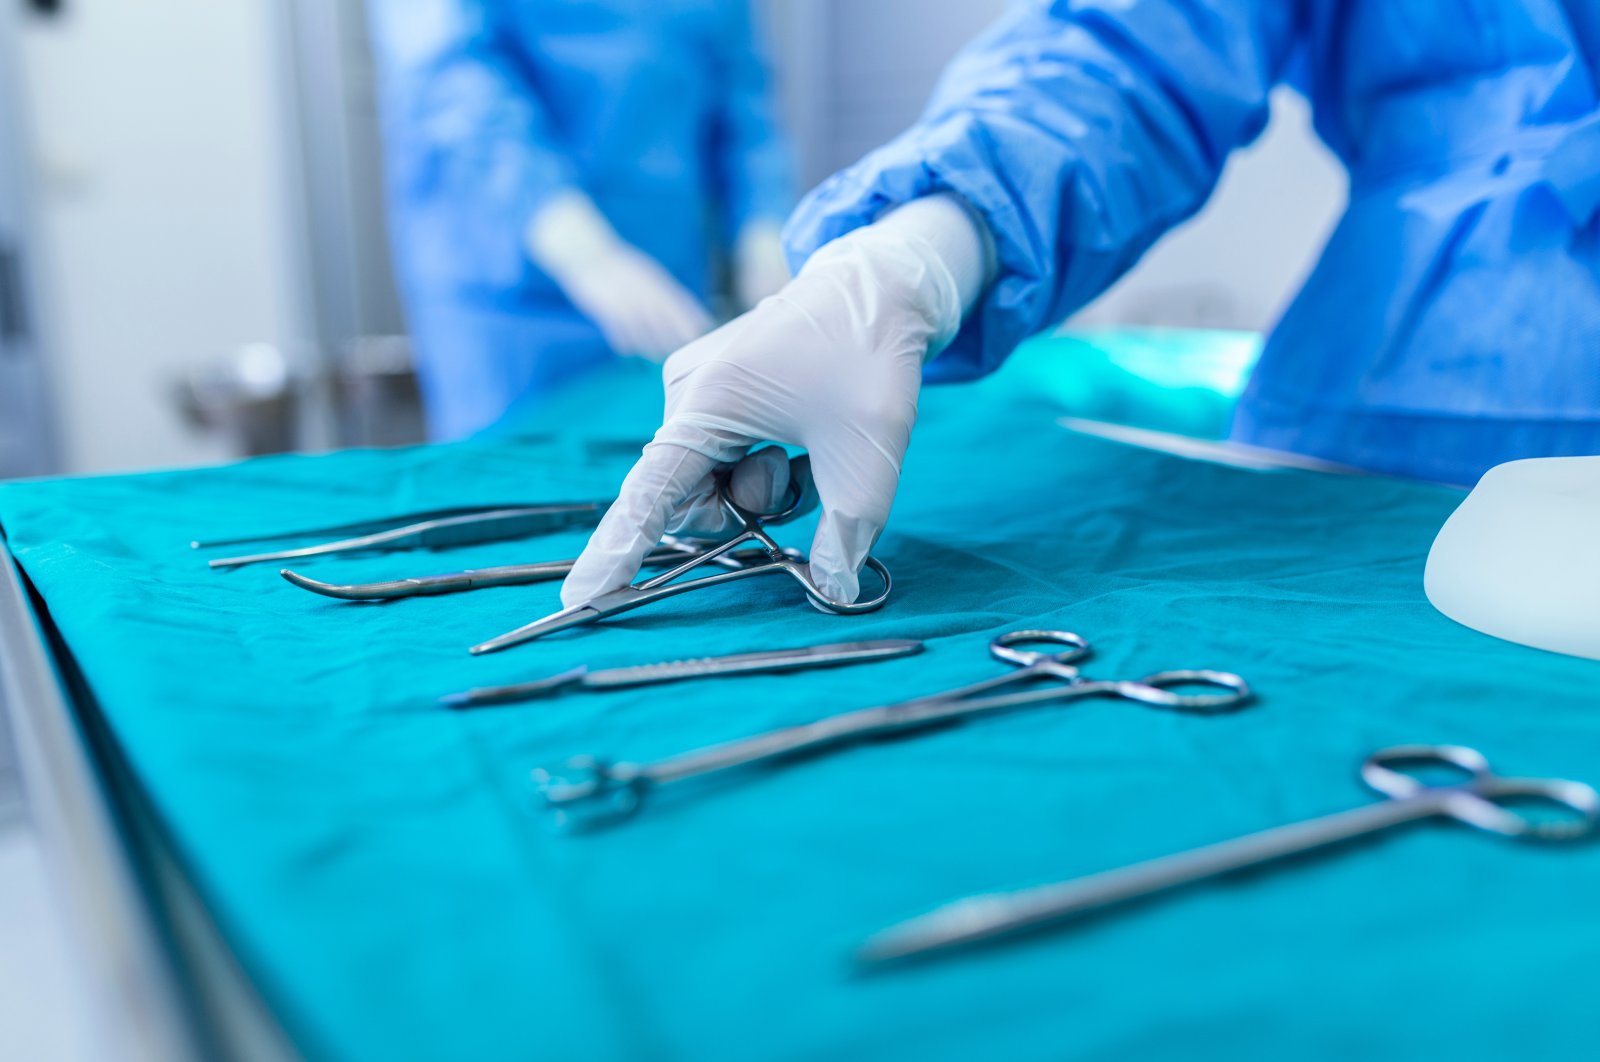 Surgical instruments and a group of surgeons operate on a patient in a surgical theater, March 22, 2023. (Shutterstock Photo)